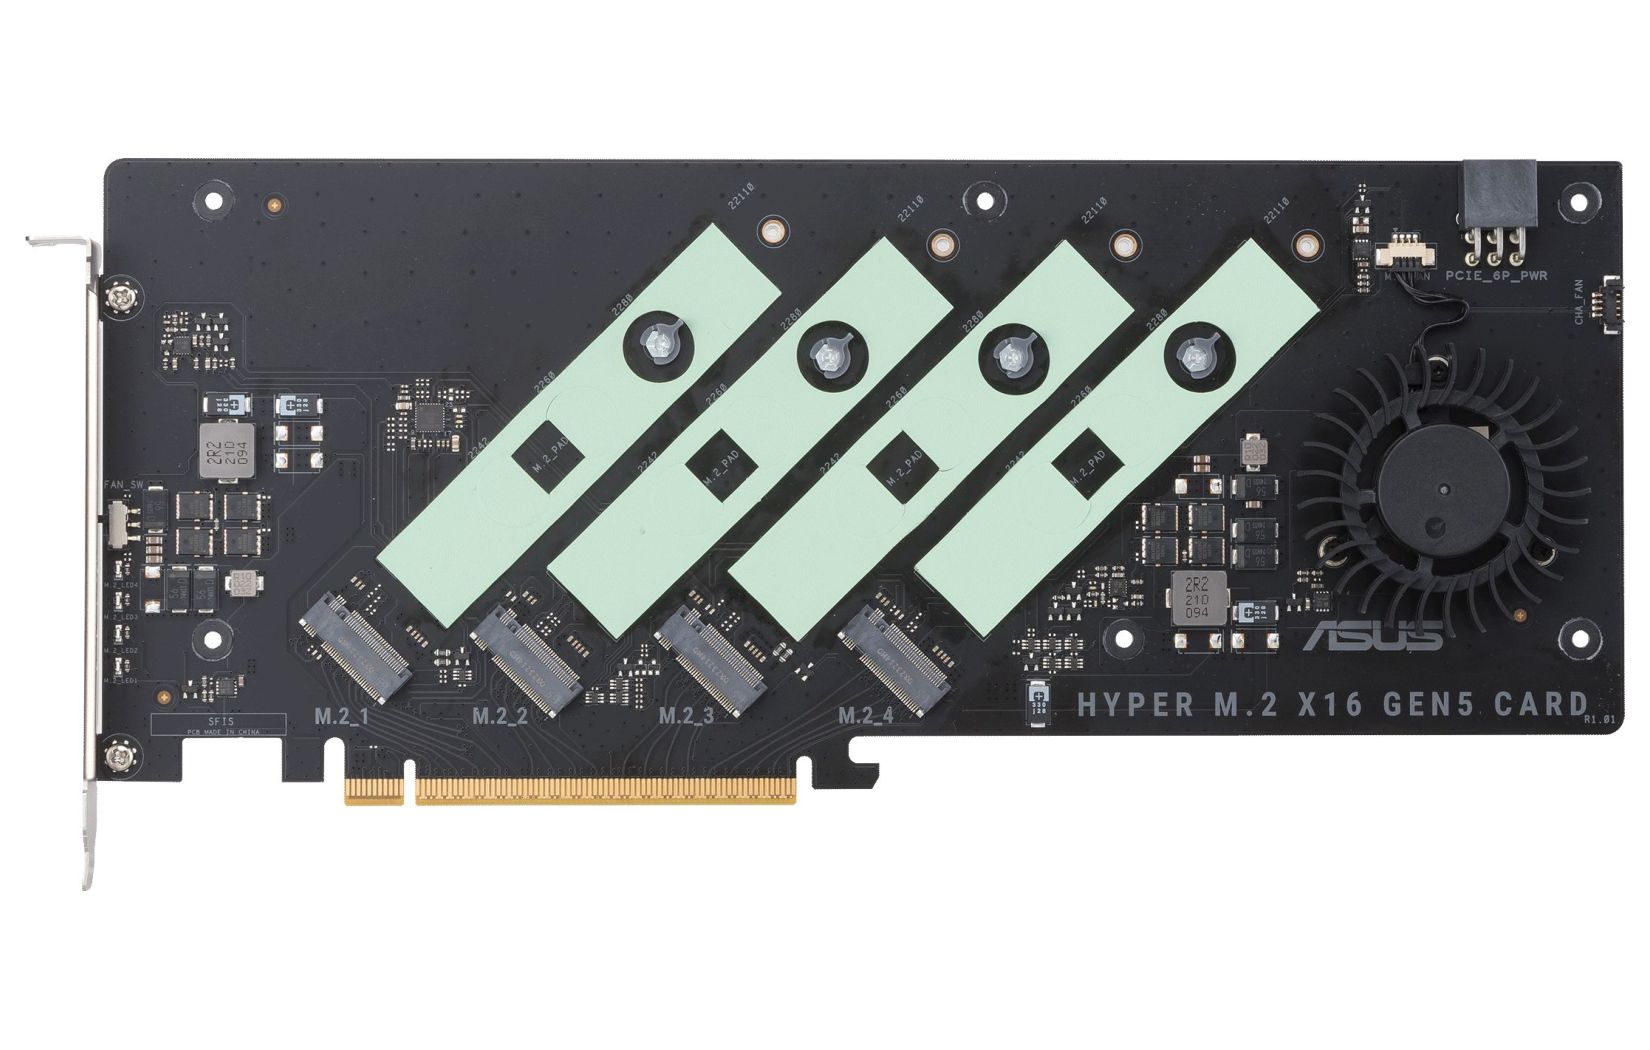 Silicon Motion says it's working on next-gen PCIe 5.0 SSD controllers